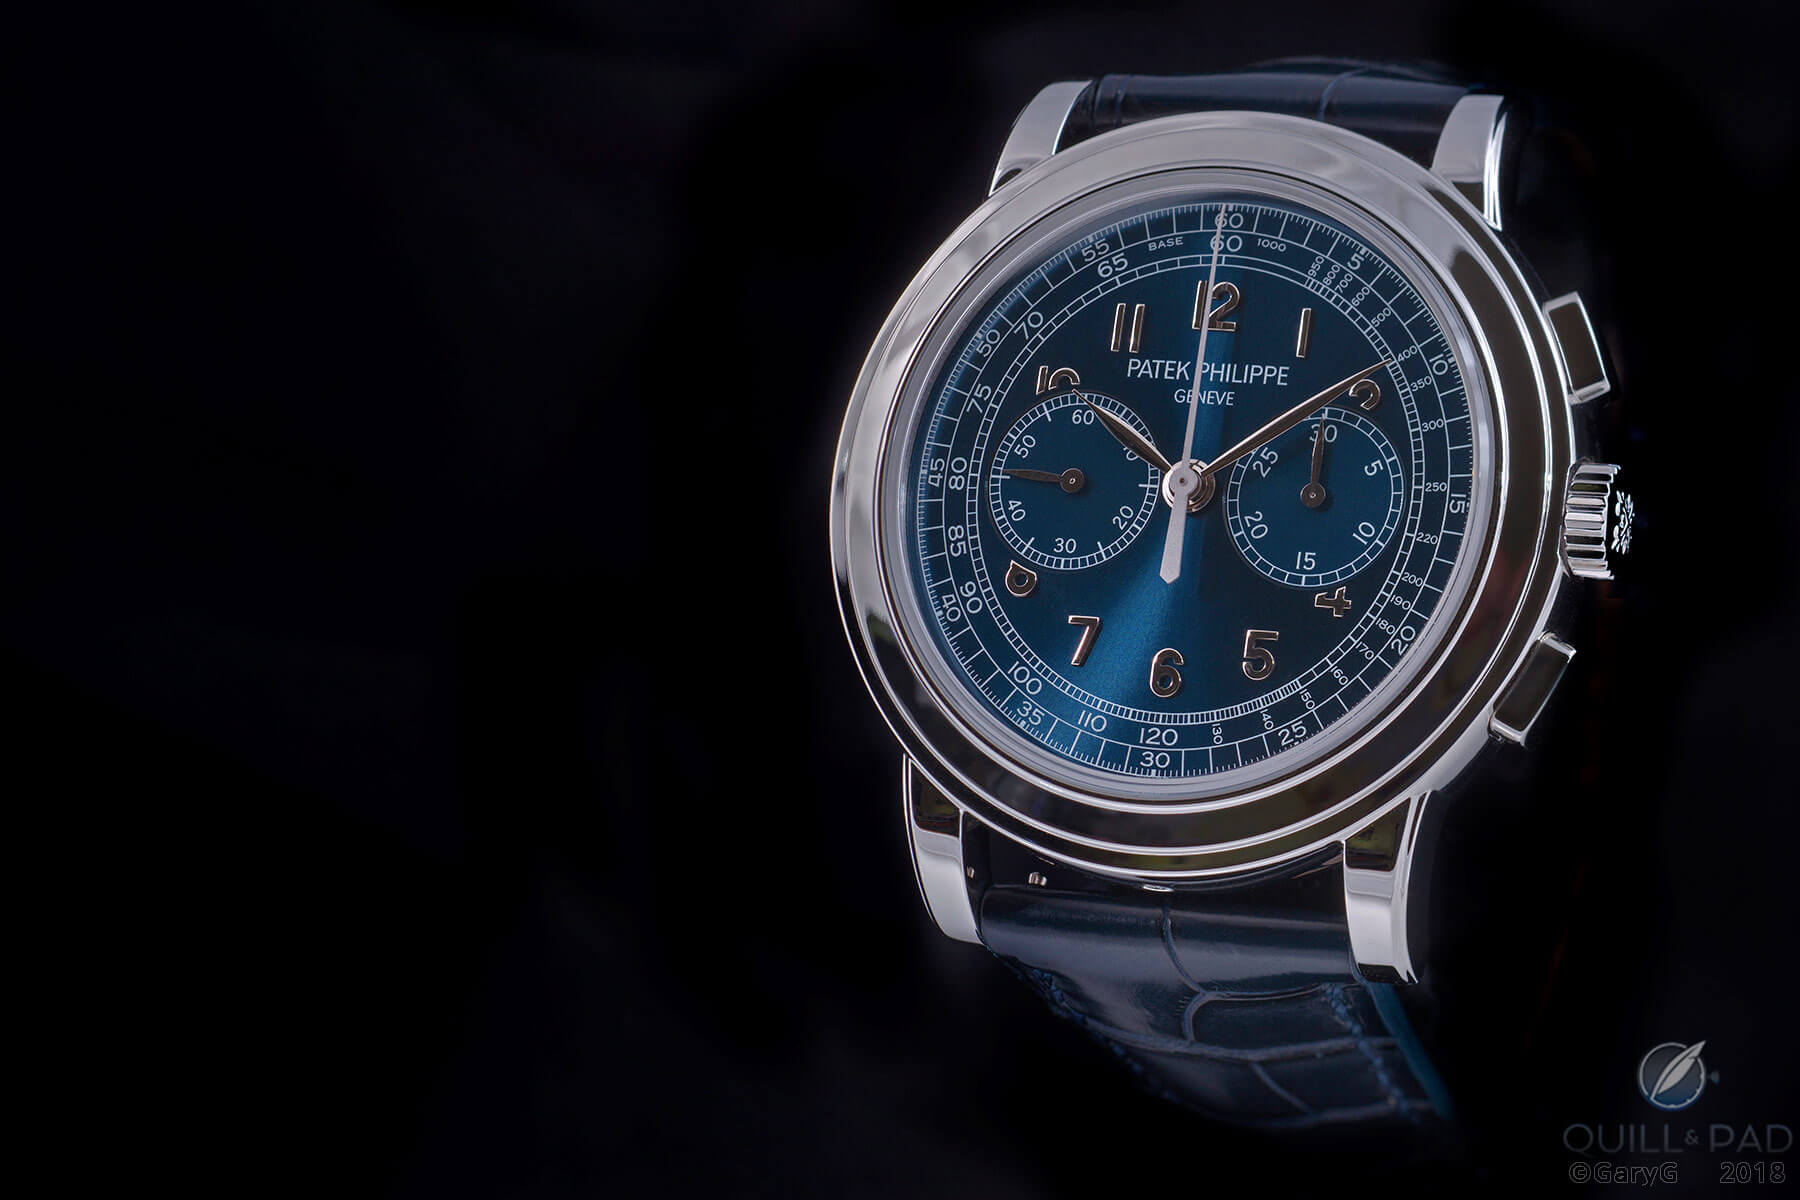 Slightly different and oh so rare: Patek Philippe Reference 5070P-013